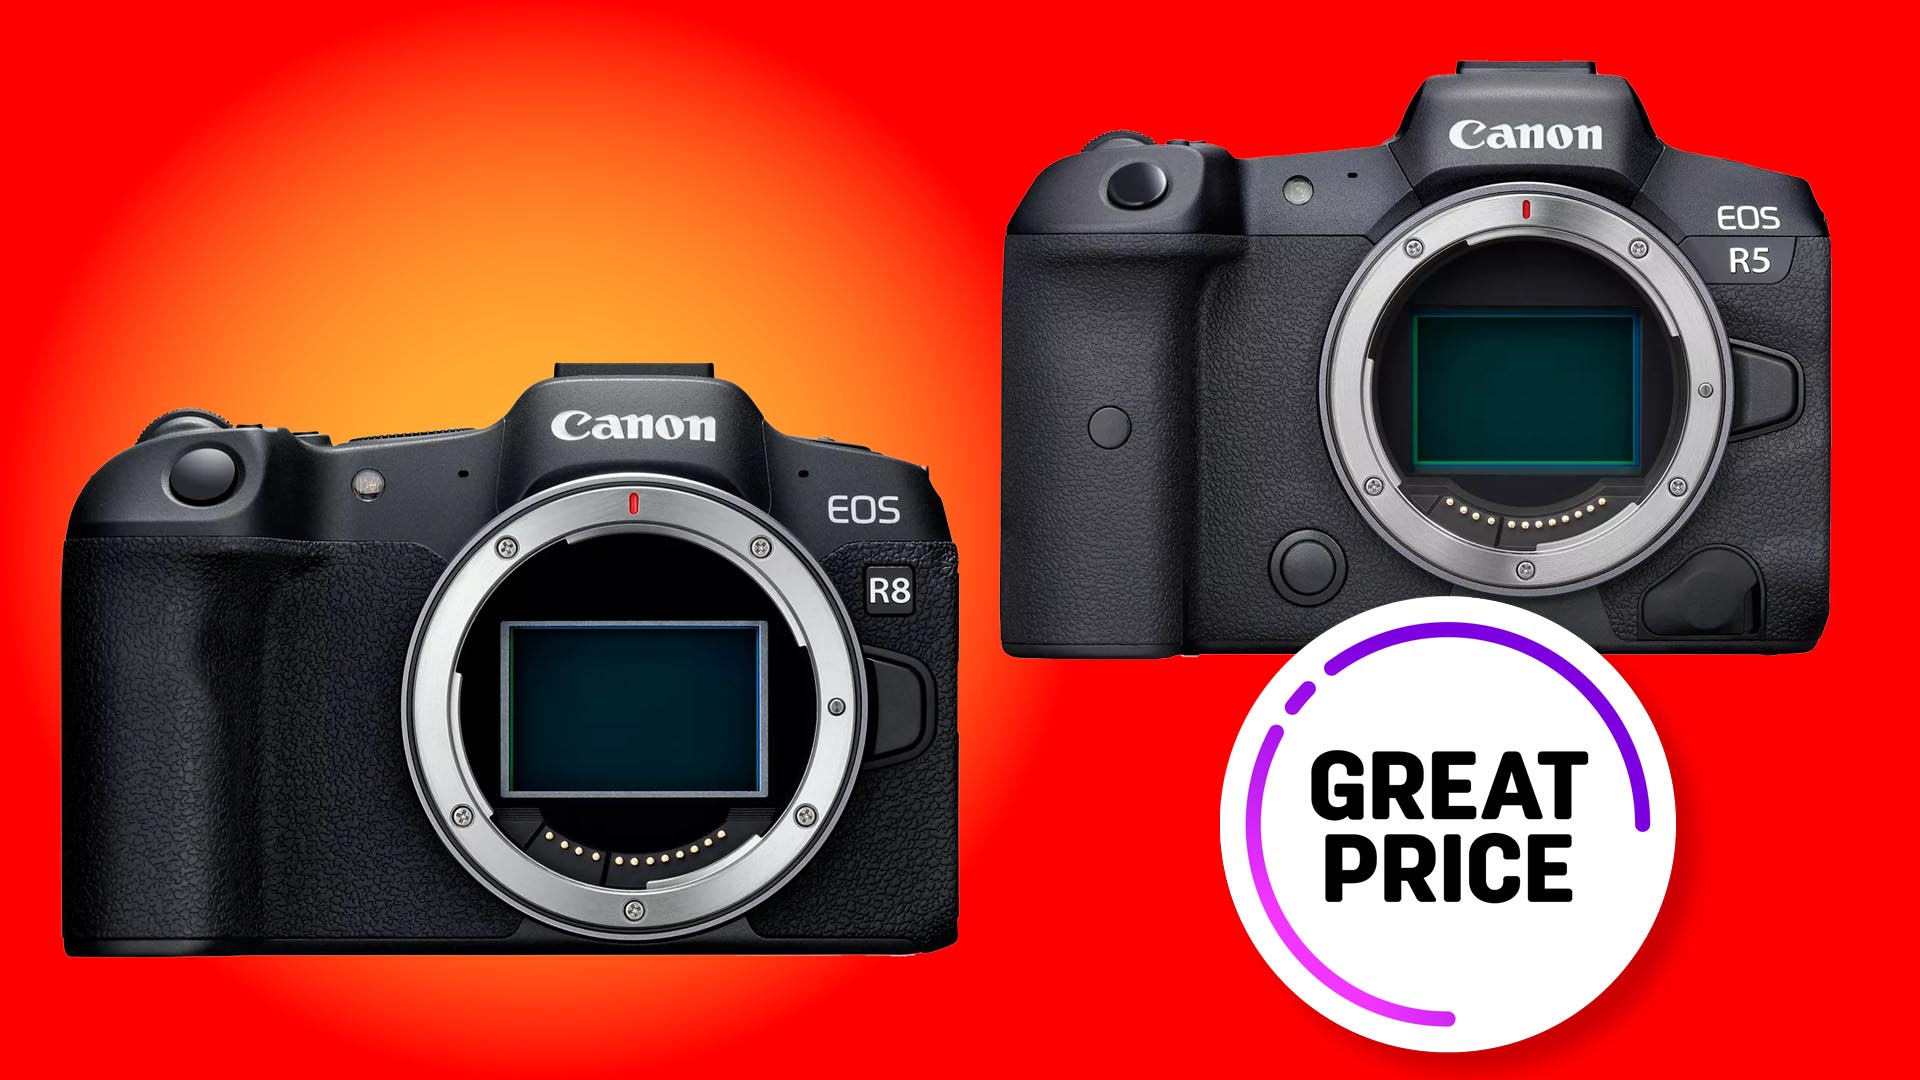 Save up to a MASSIVE $660 on these Canon refurb camera deals